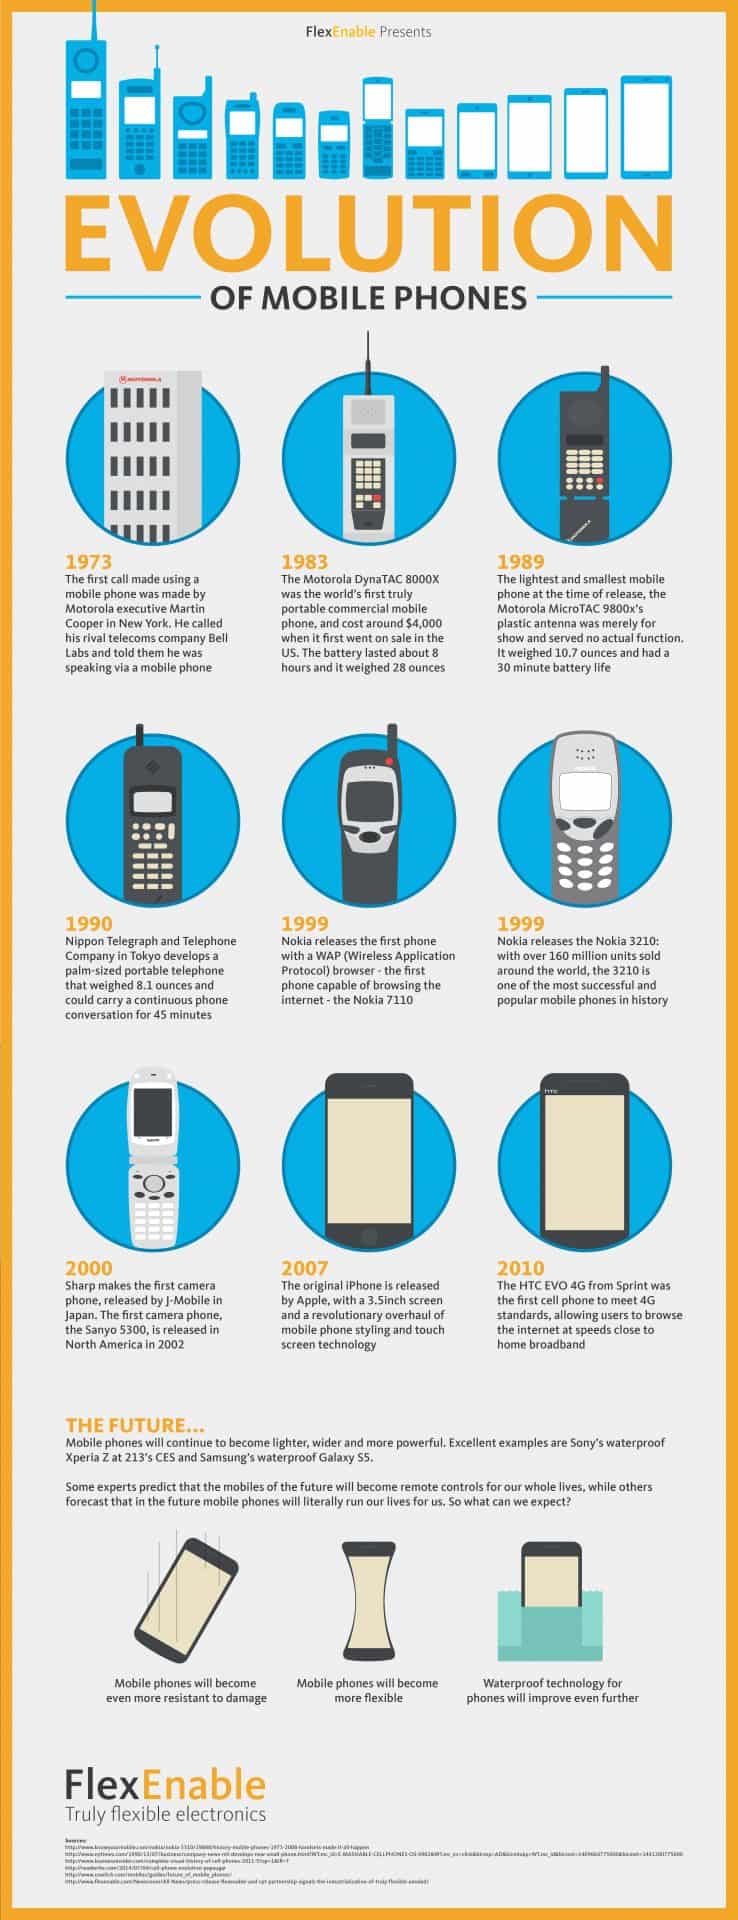 Visual portrait of The Evolution of Mobile Phones infographic